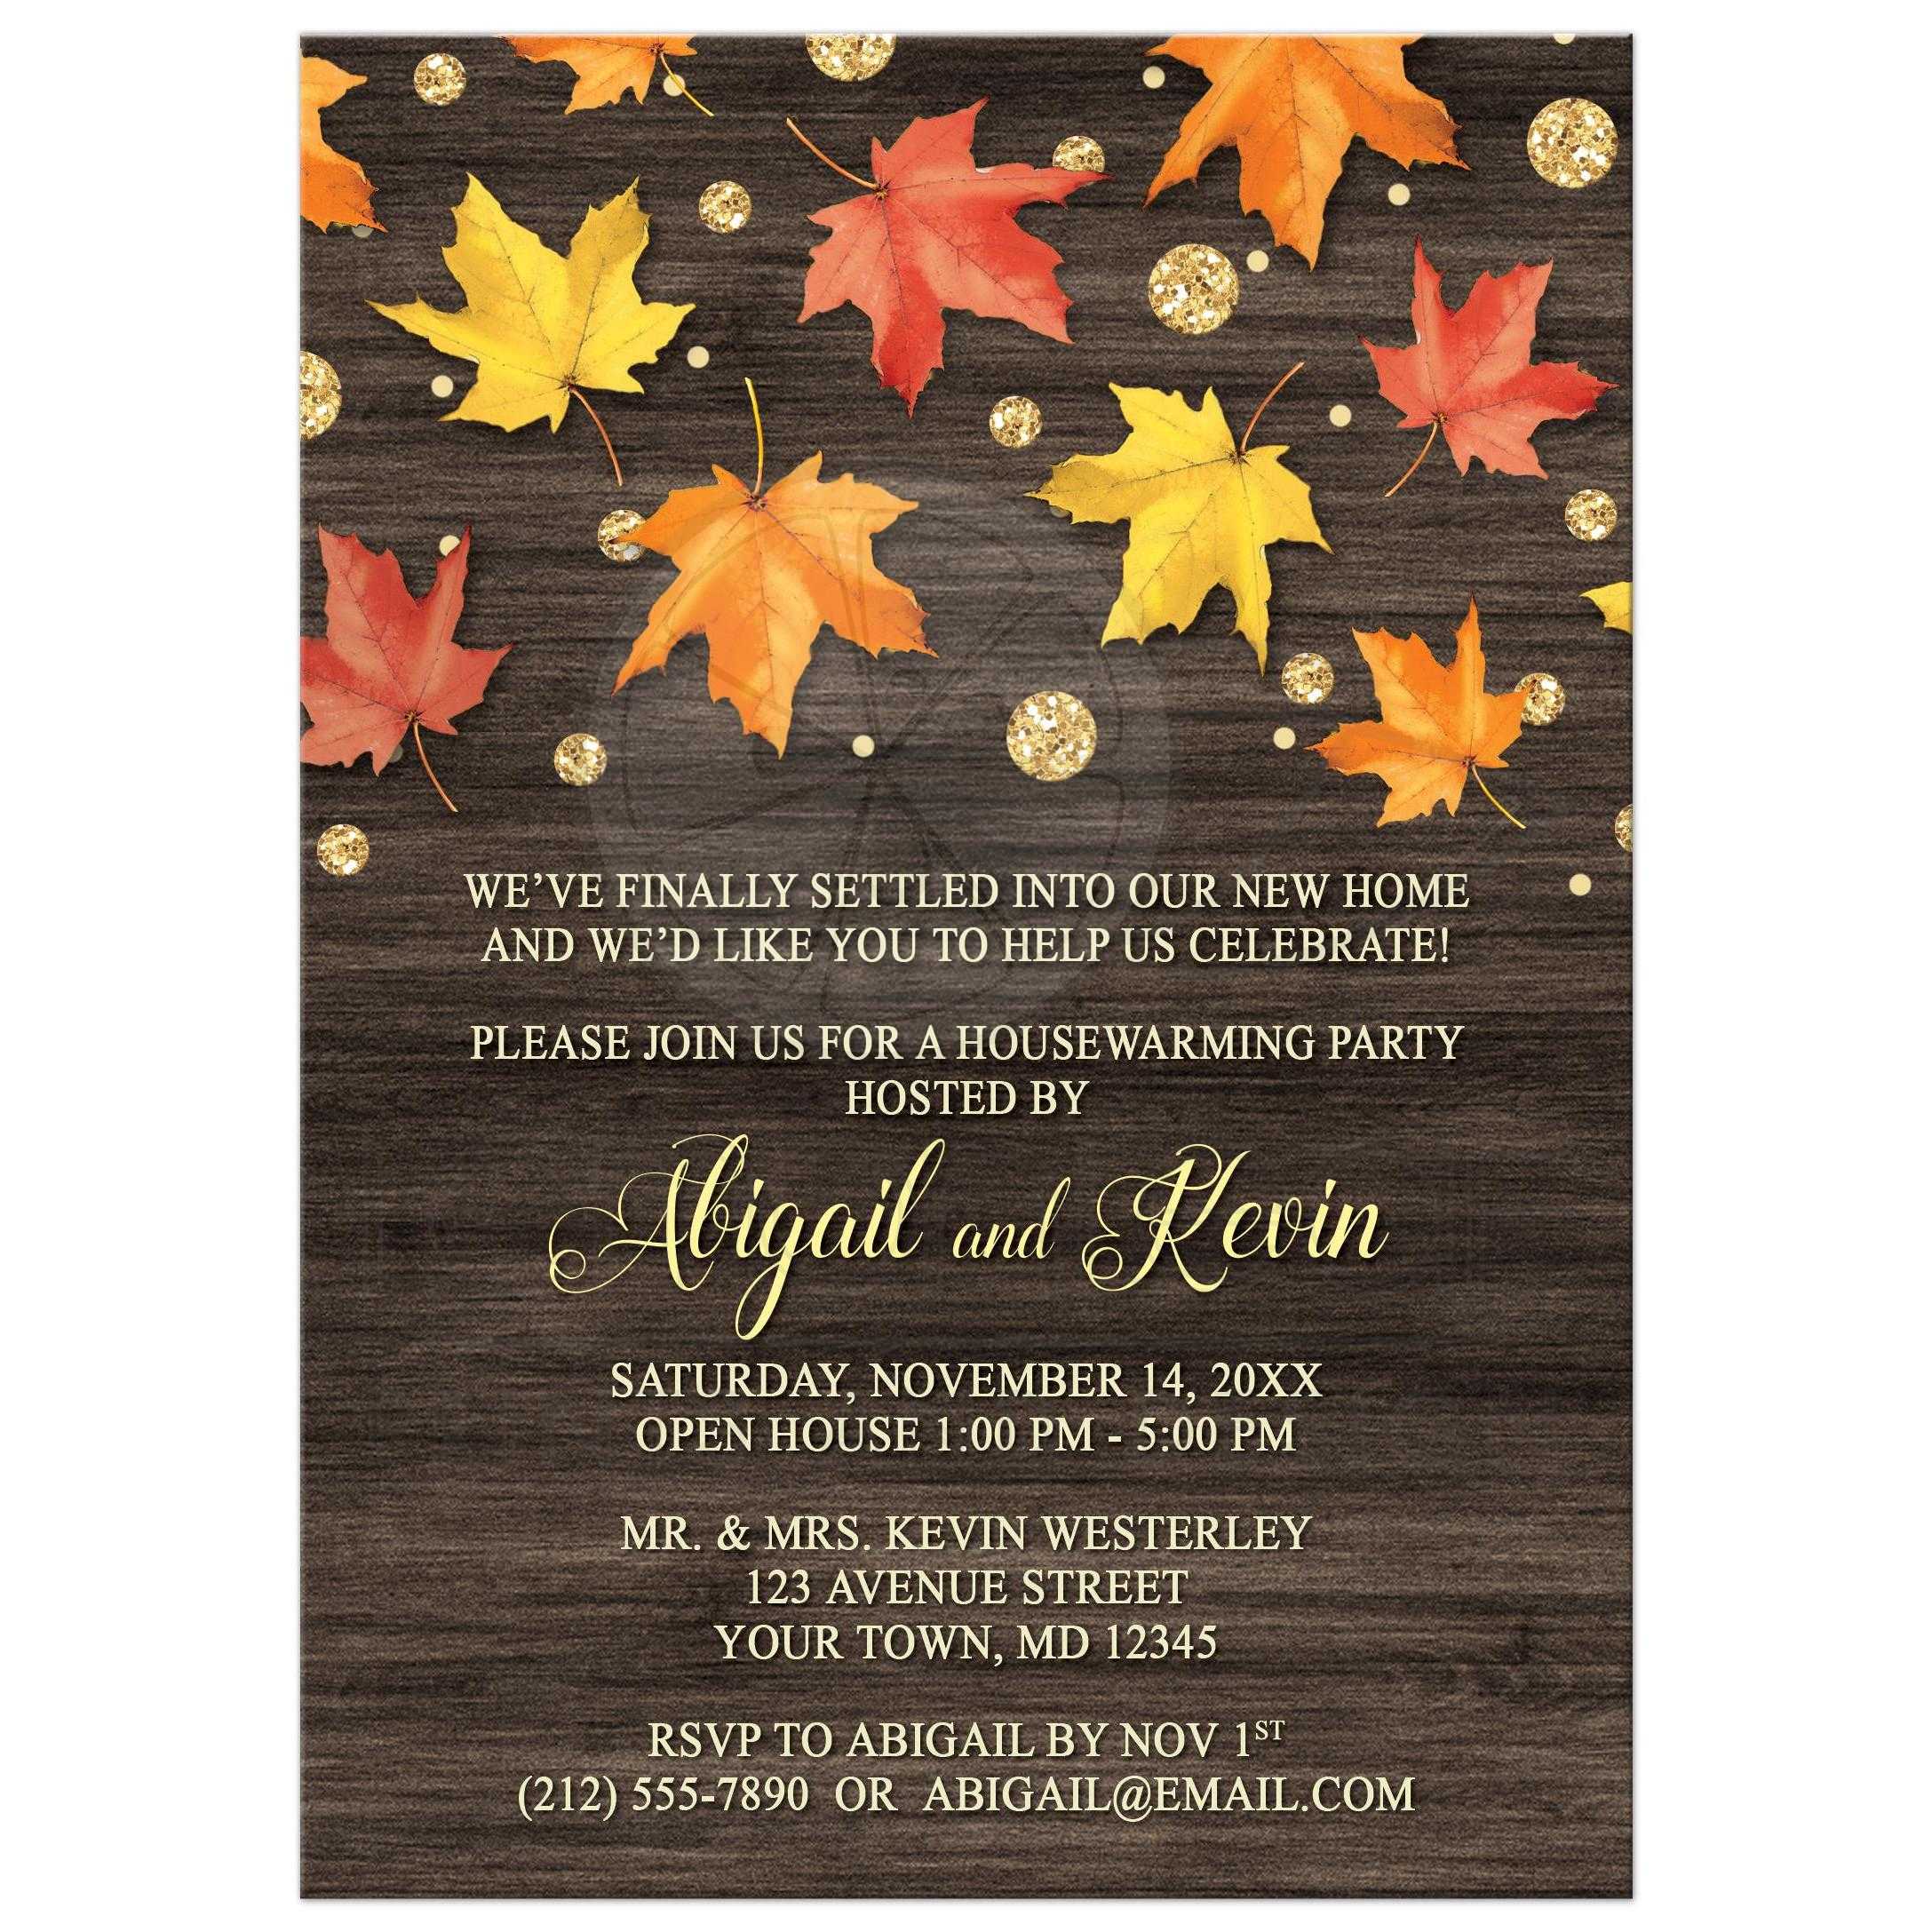 Housewarming Invitations   Falling Leaves with Gold Autumn